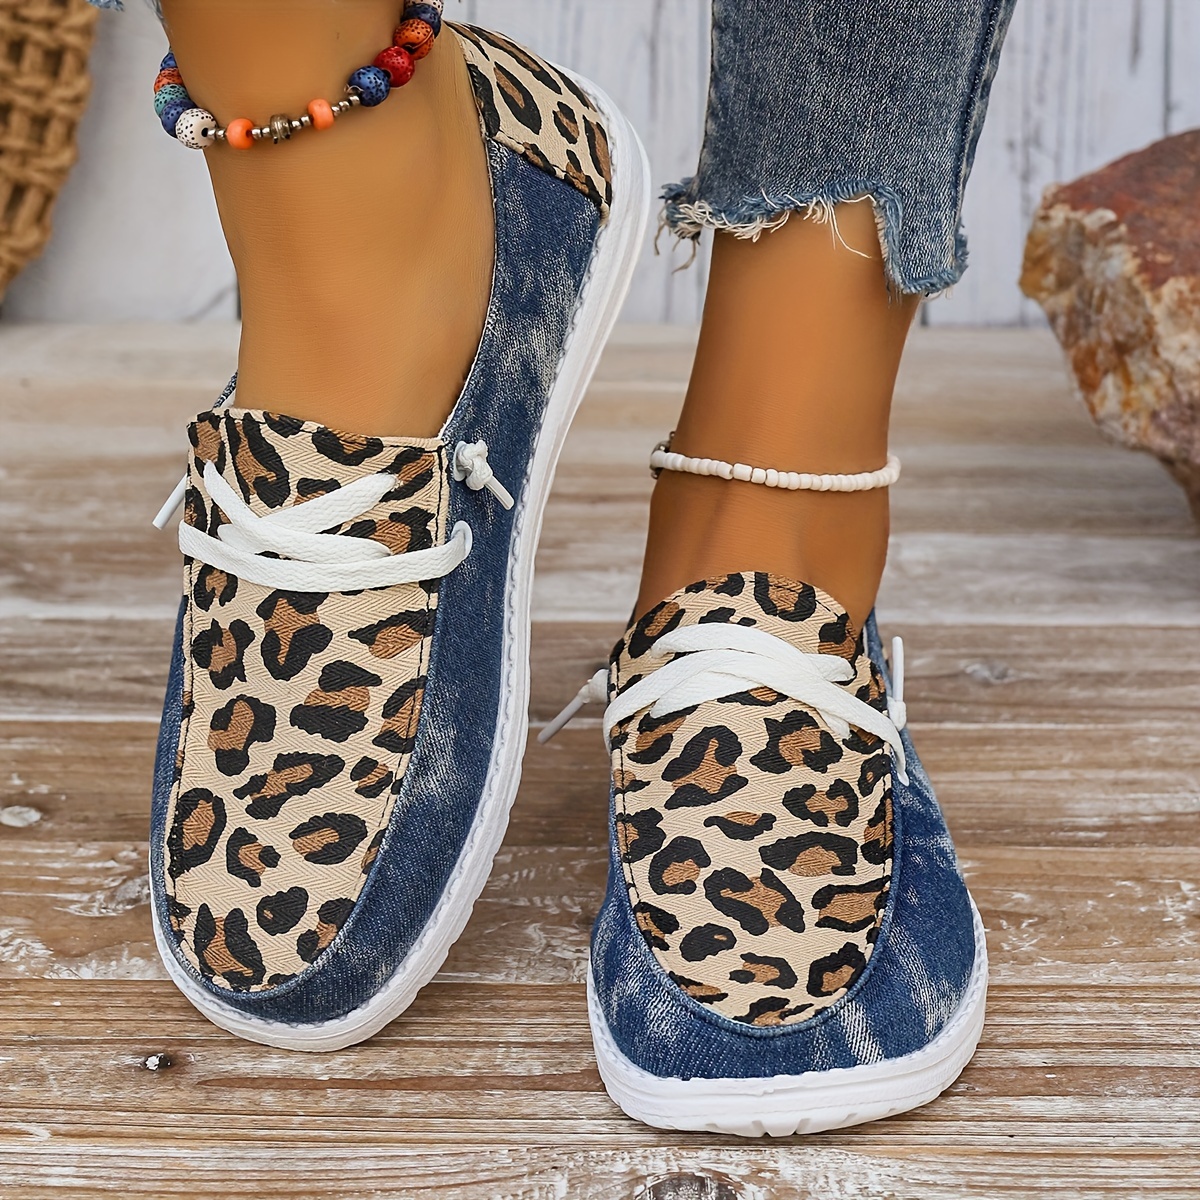 Women's Leopard Printed Canvas Shoes, Casual Round Toe Lace Up Sneakers,  Versatile Low Top Flats